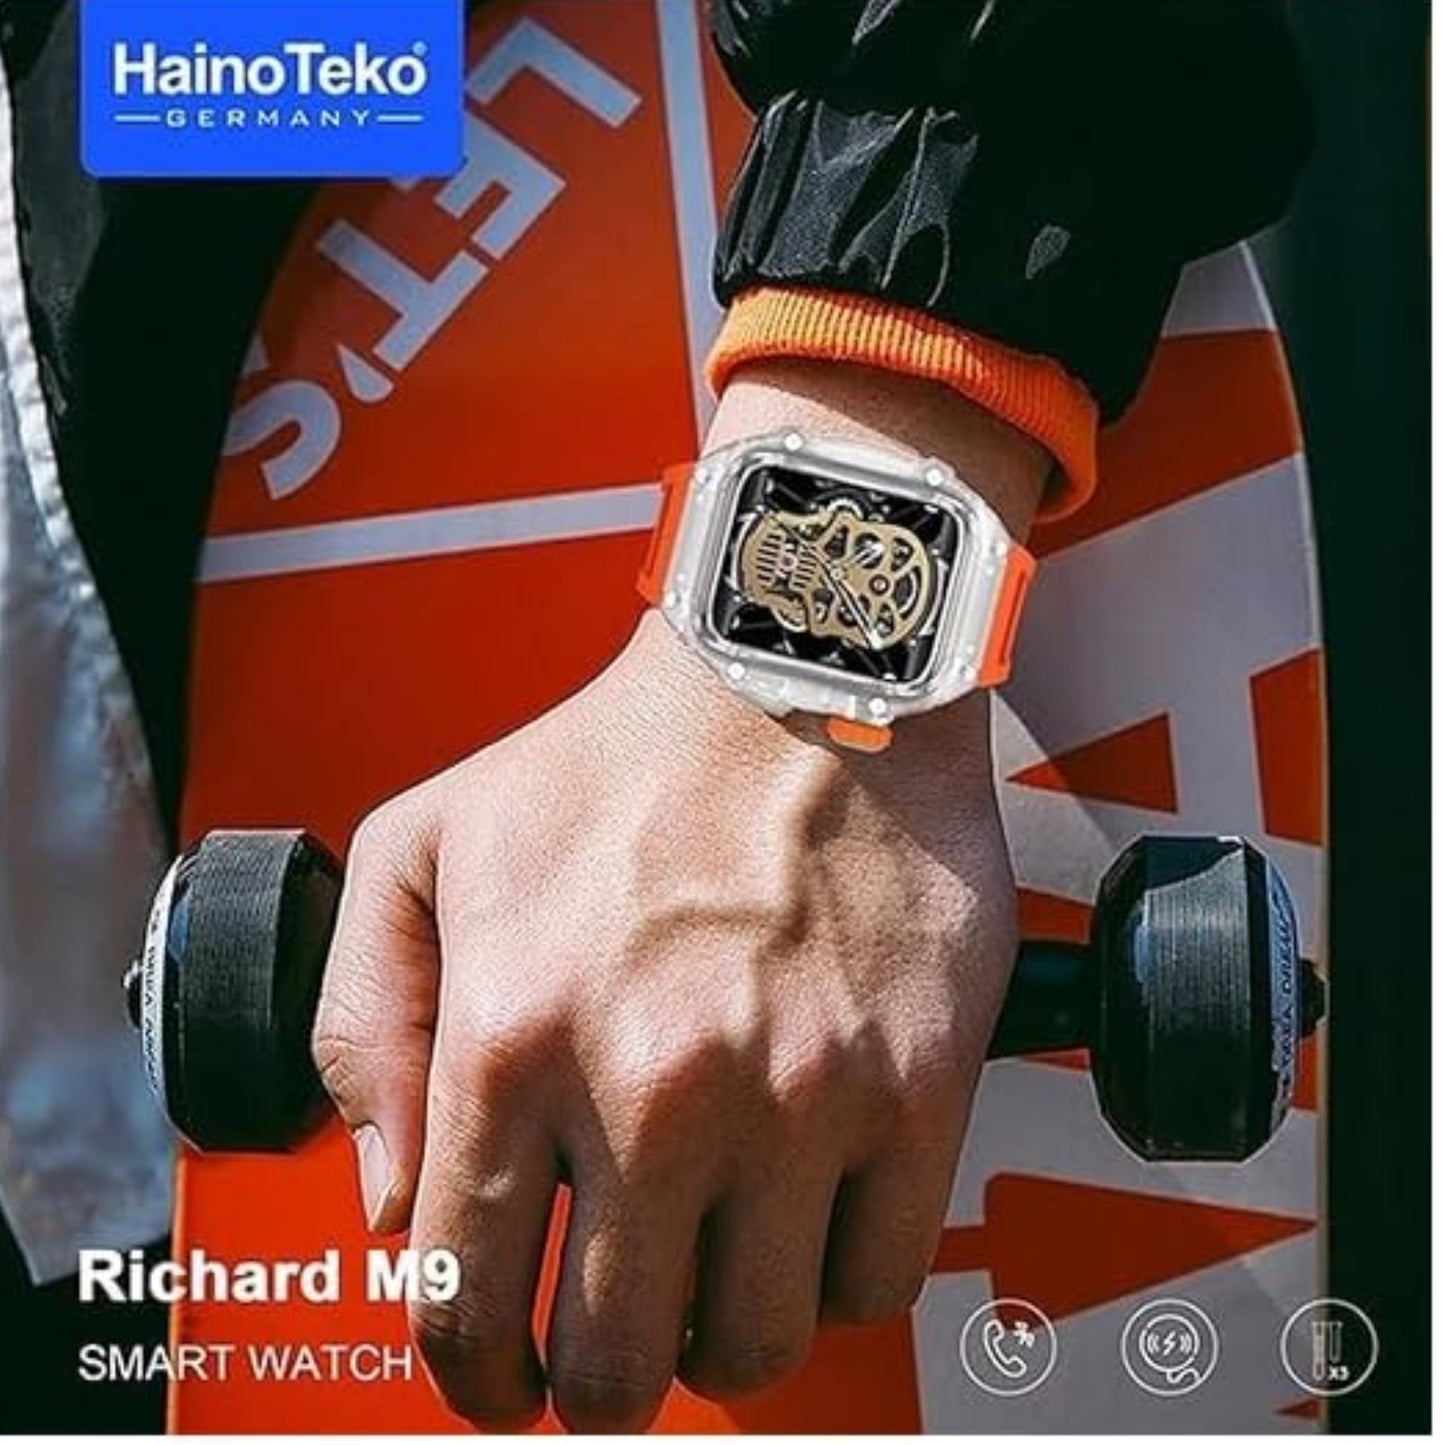 Haino Teko Germany Richard M9 Smart Watch With 3 Pair Straps and 1 Protection case For Men